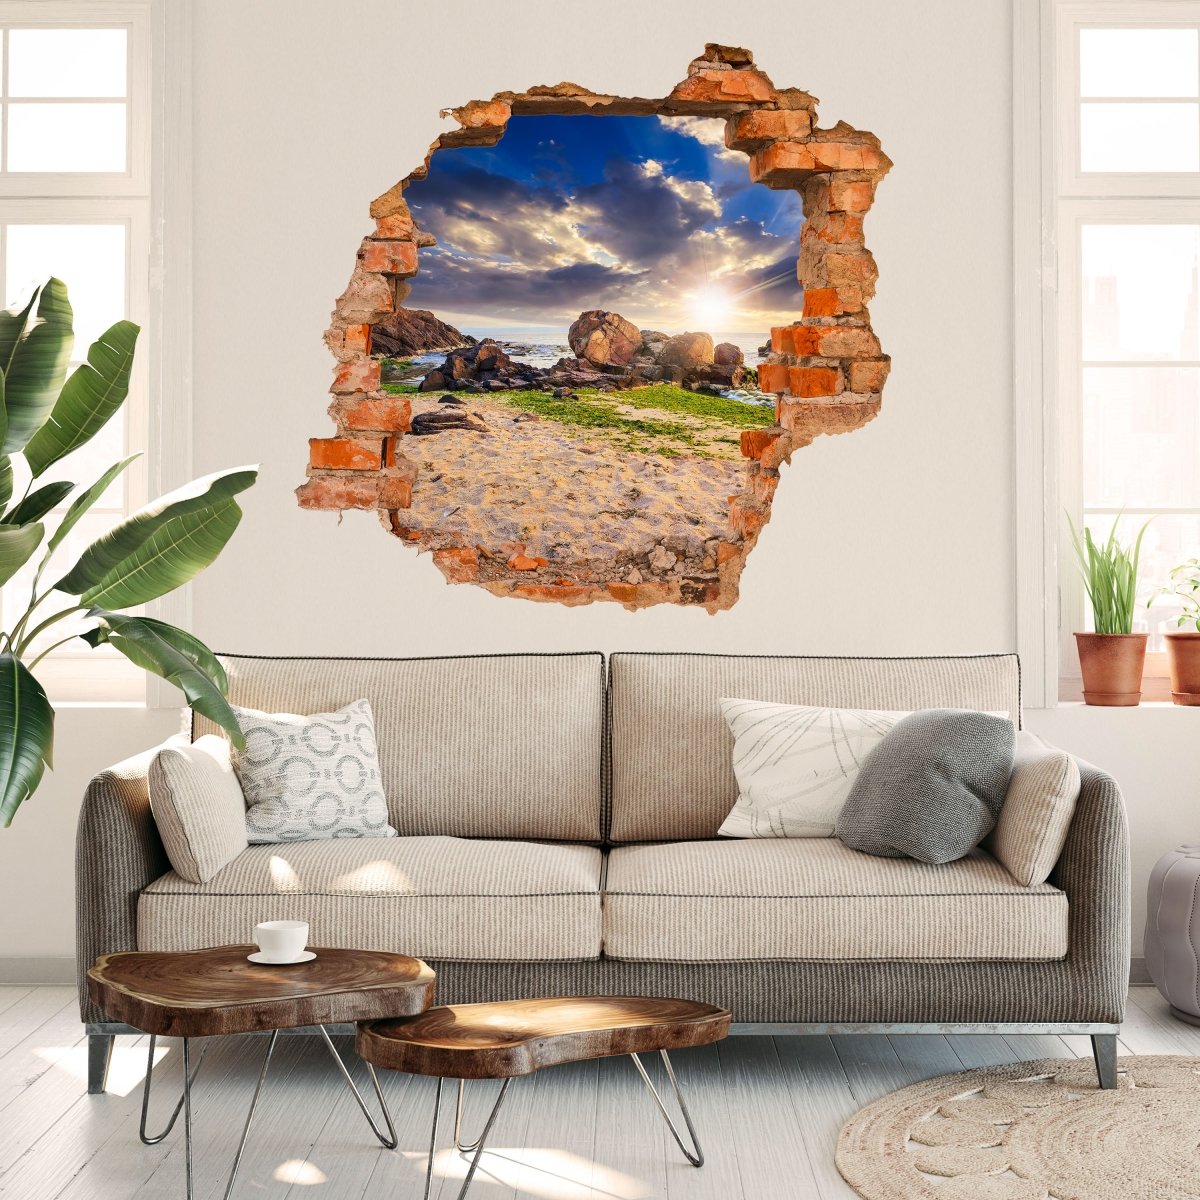 3D wall sticker coast at sunset - Wall Decal M0044